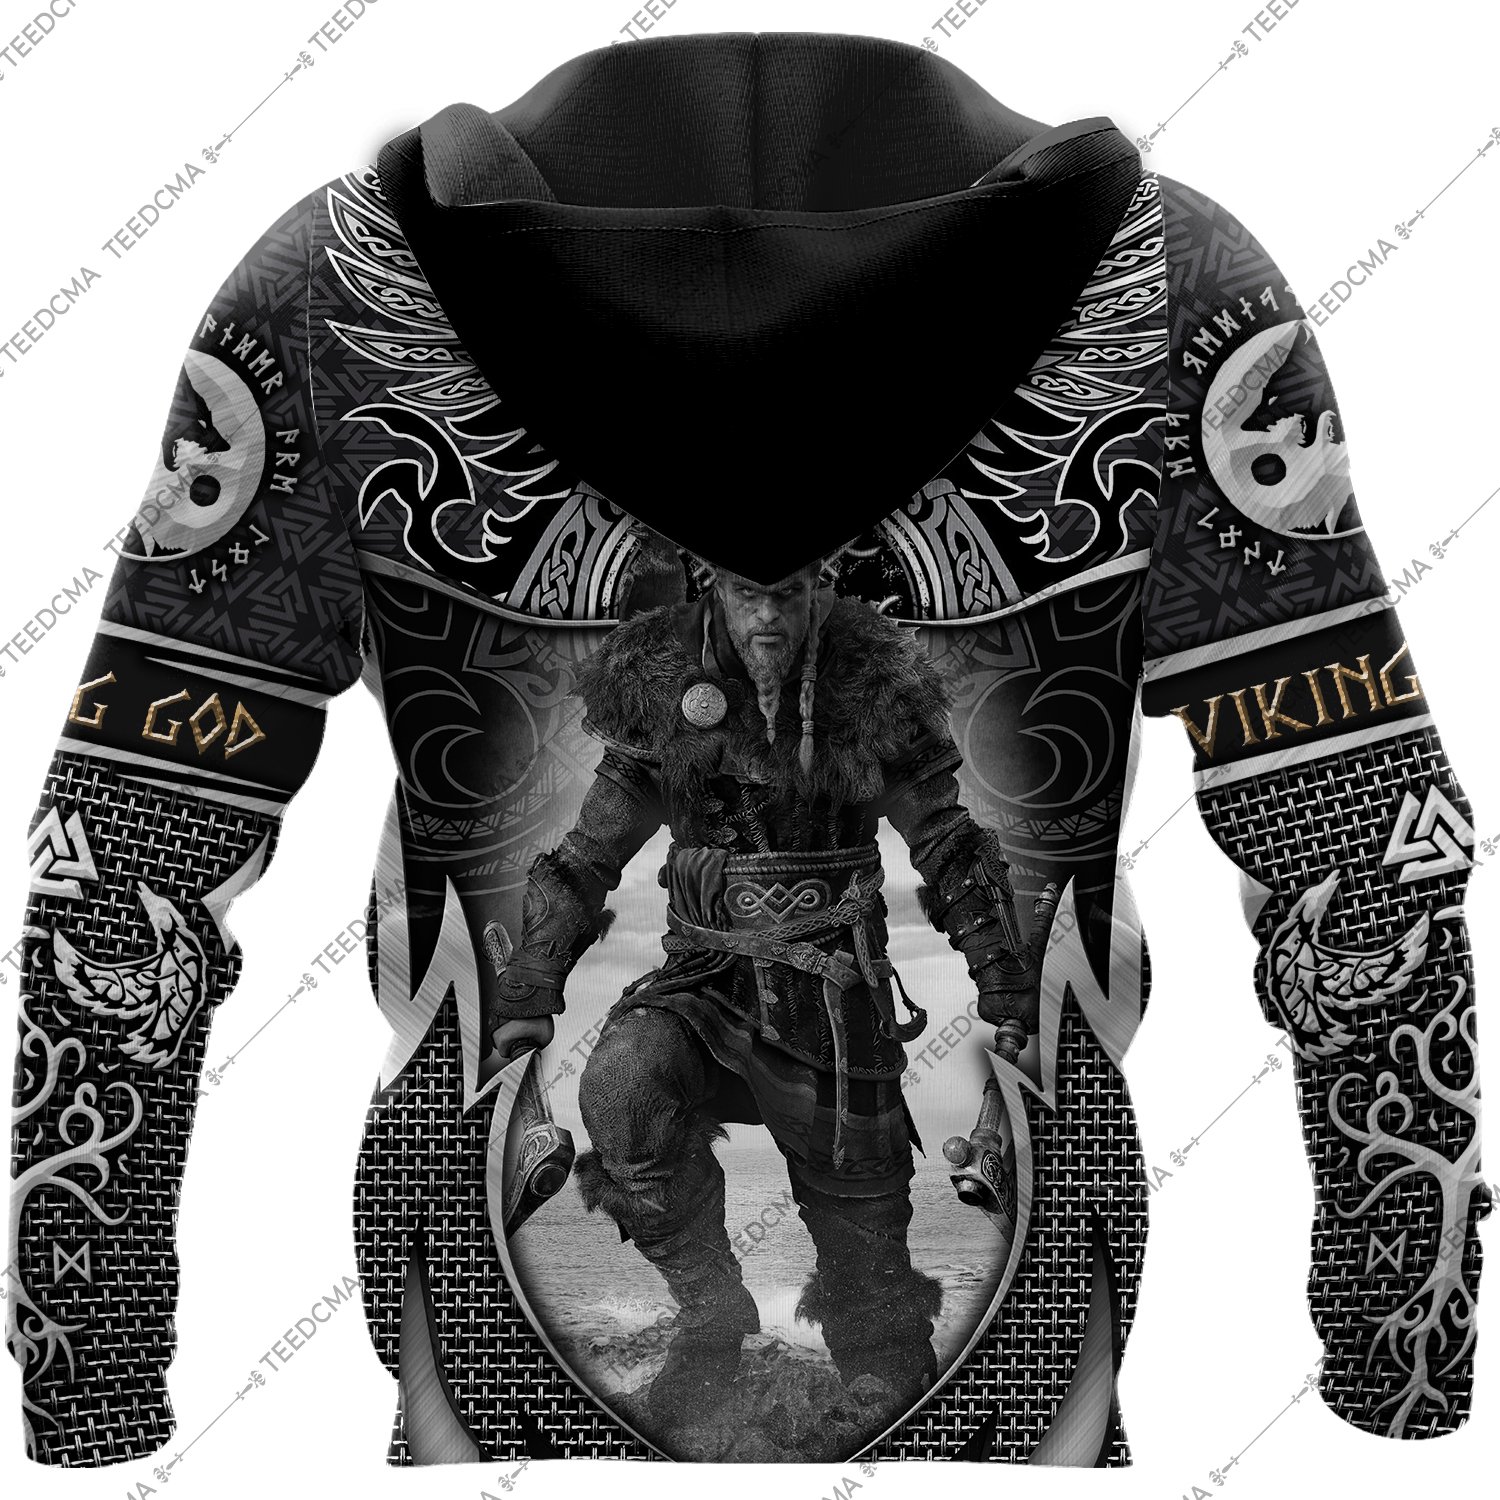 assassin's creed valhalla viking all over printed hoodie - back